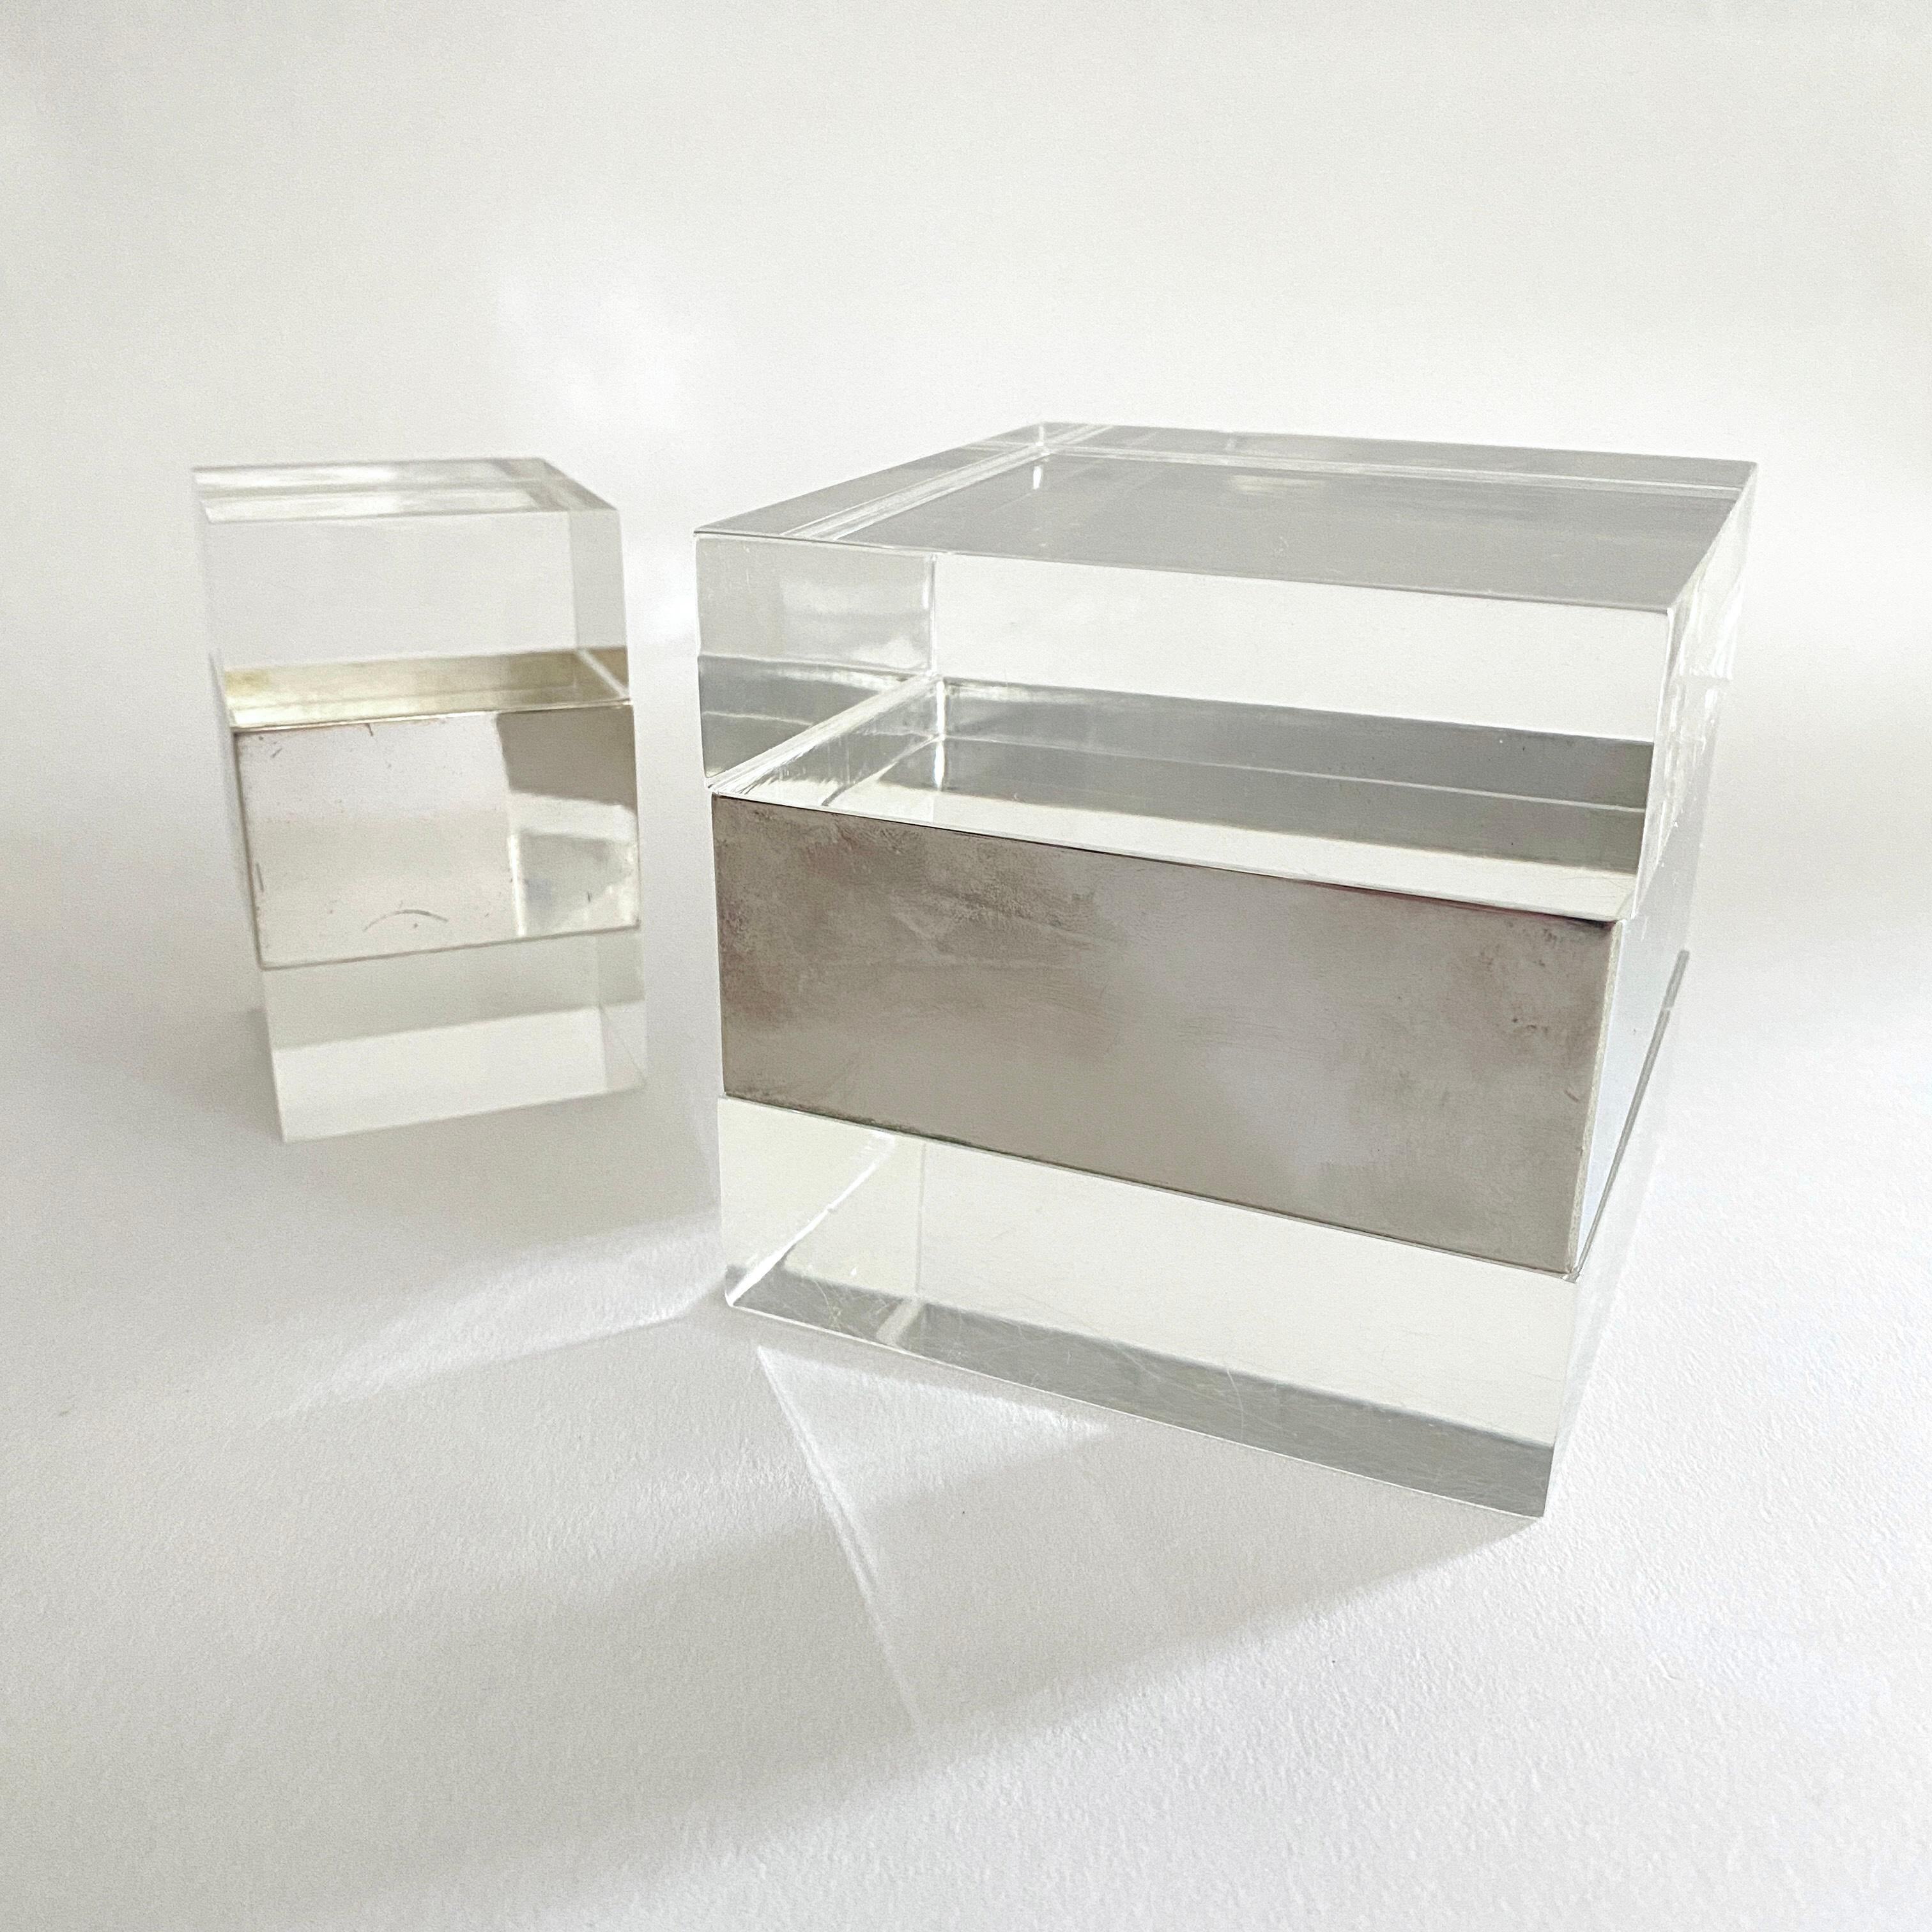 Two Lucite And Silver Plate Boxes Designed By Gabriella Crespi For Sale 4